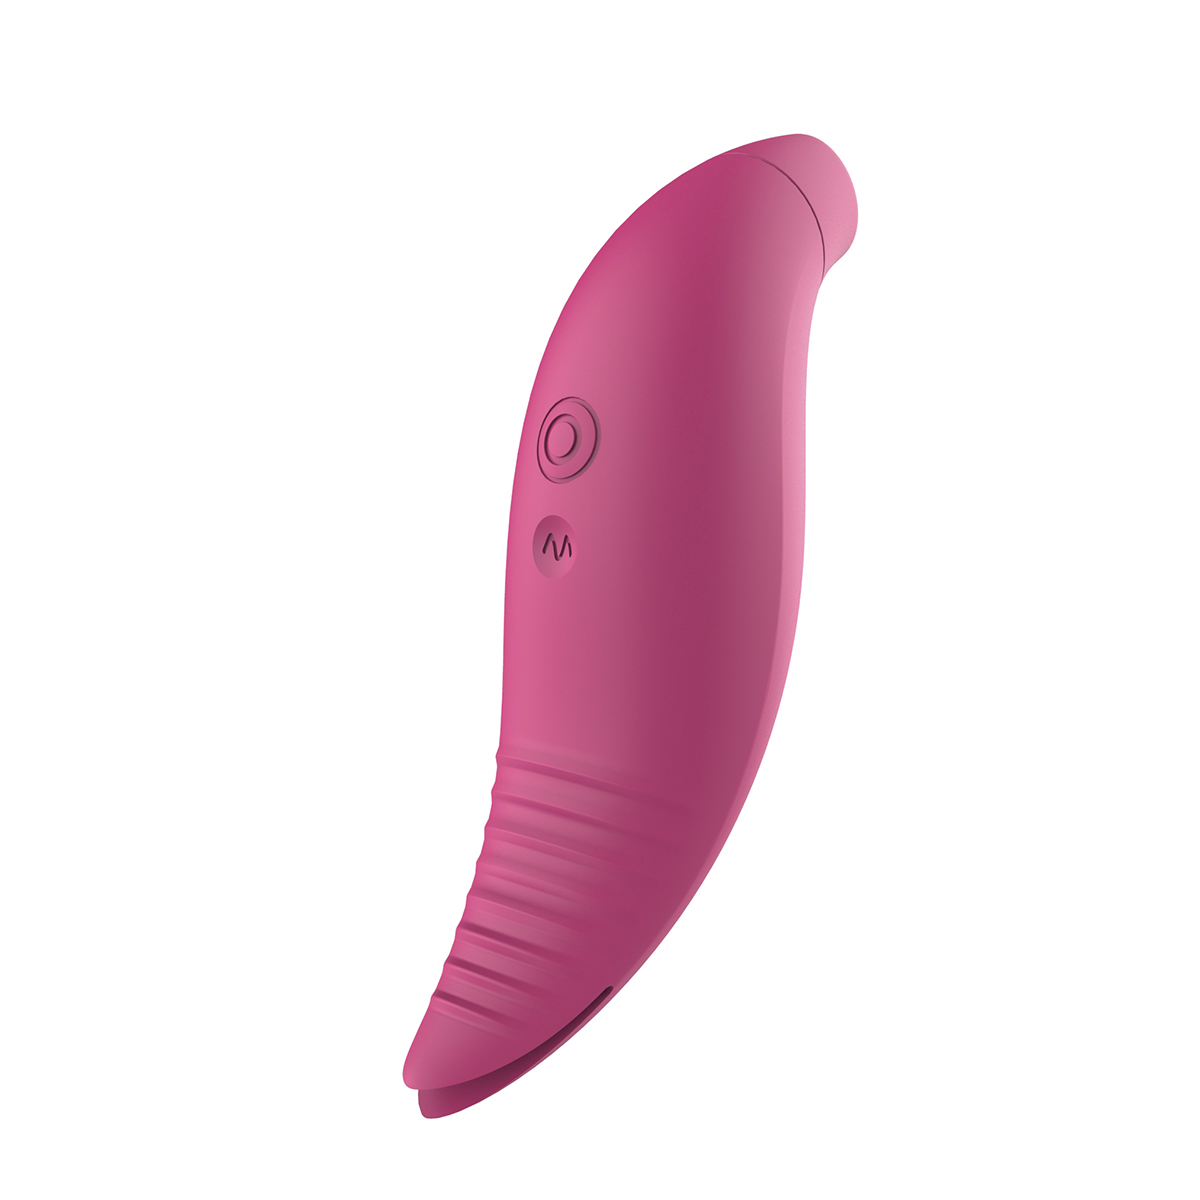 2 in 1 Bottom vibrating and Sucking Vibrator